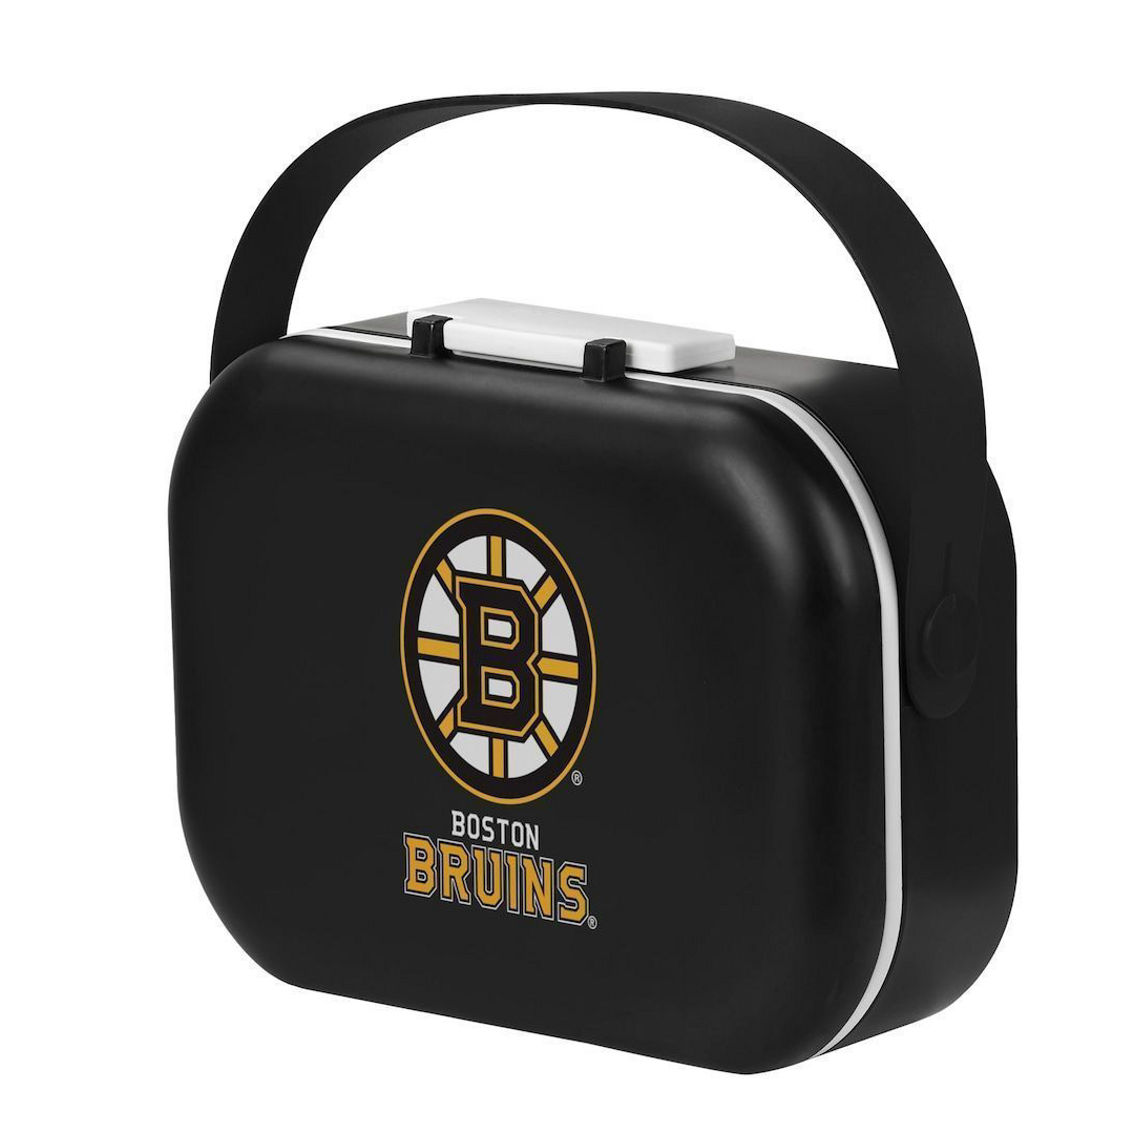 FOCO Boston Bruins Hard Shell Compartment Lunch Box - Image 2 of 3